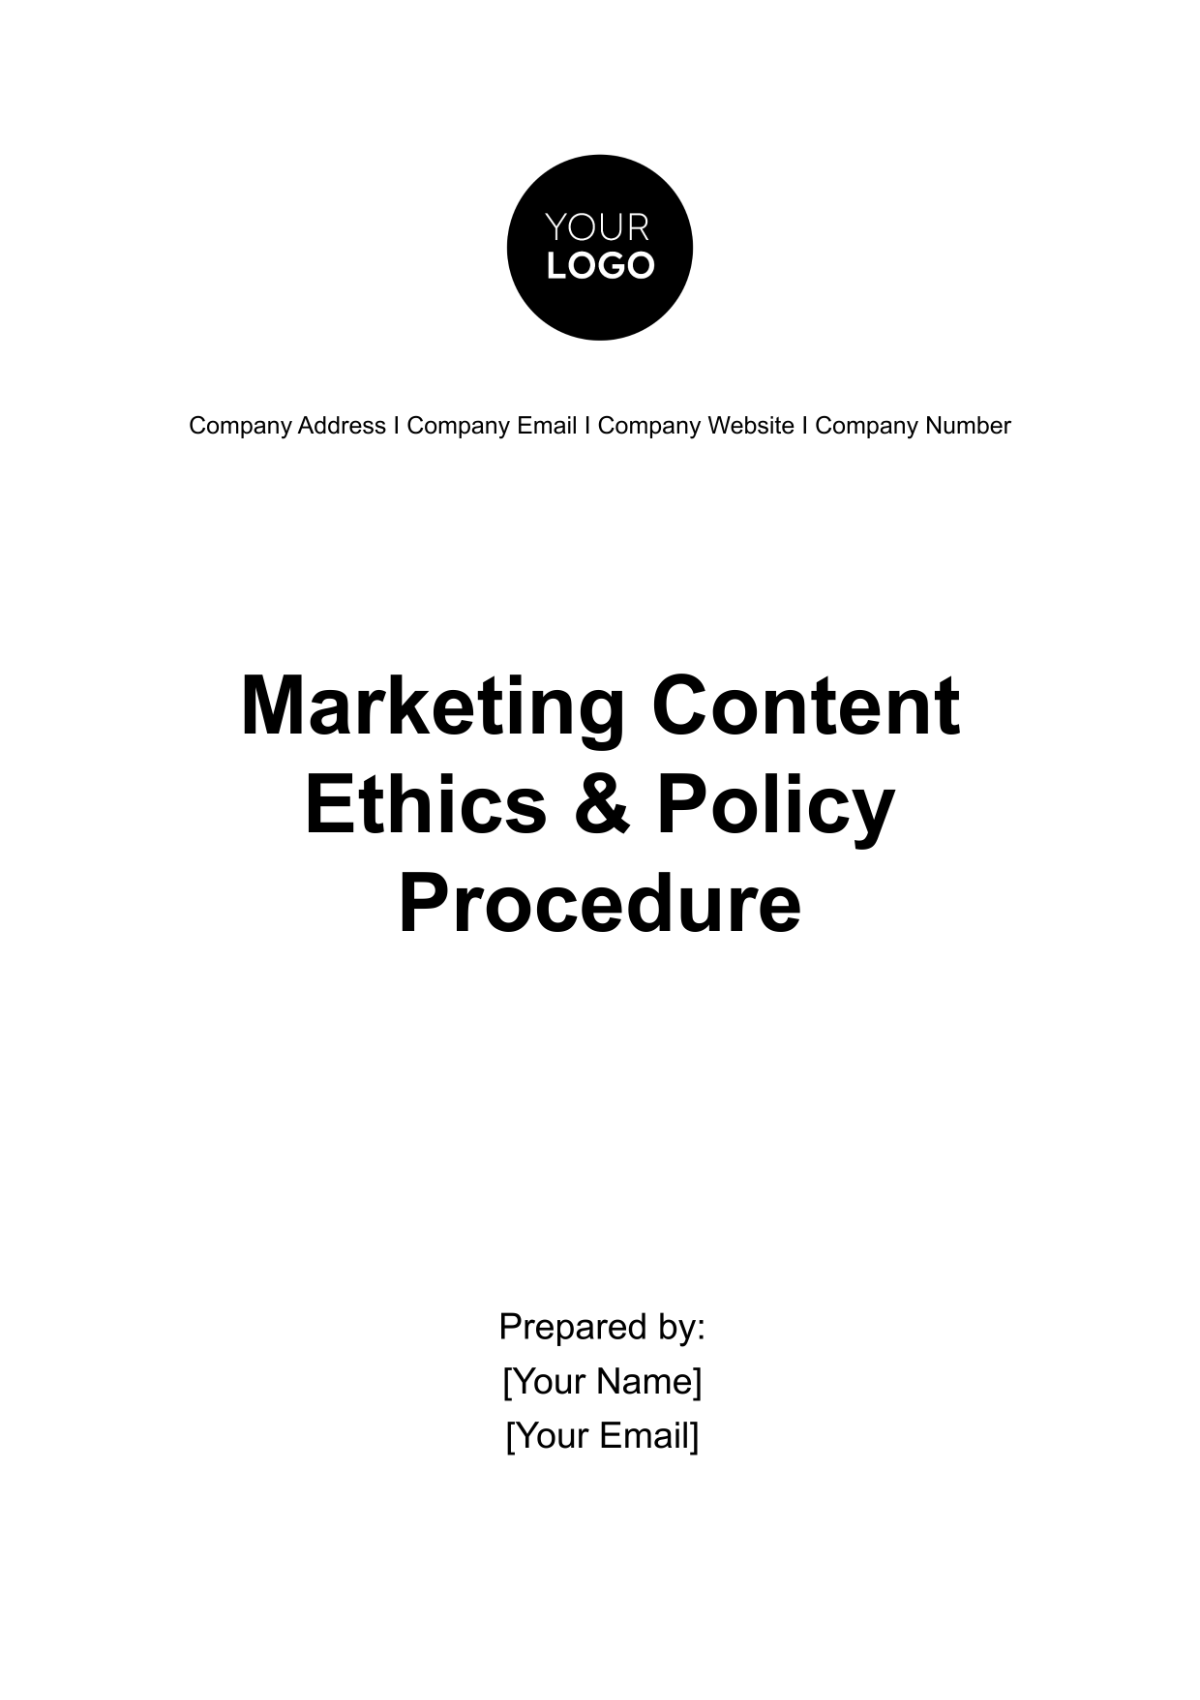 Free Marketing Content Ethics & Policy Procedure Template